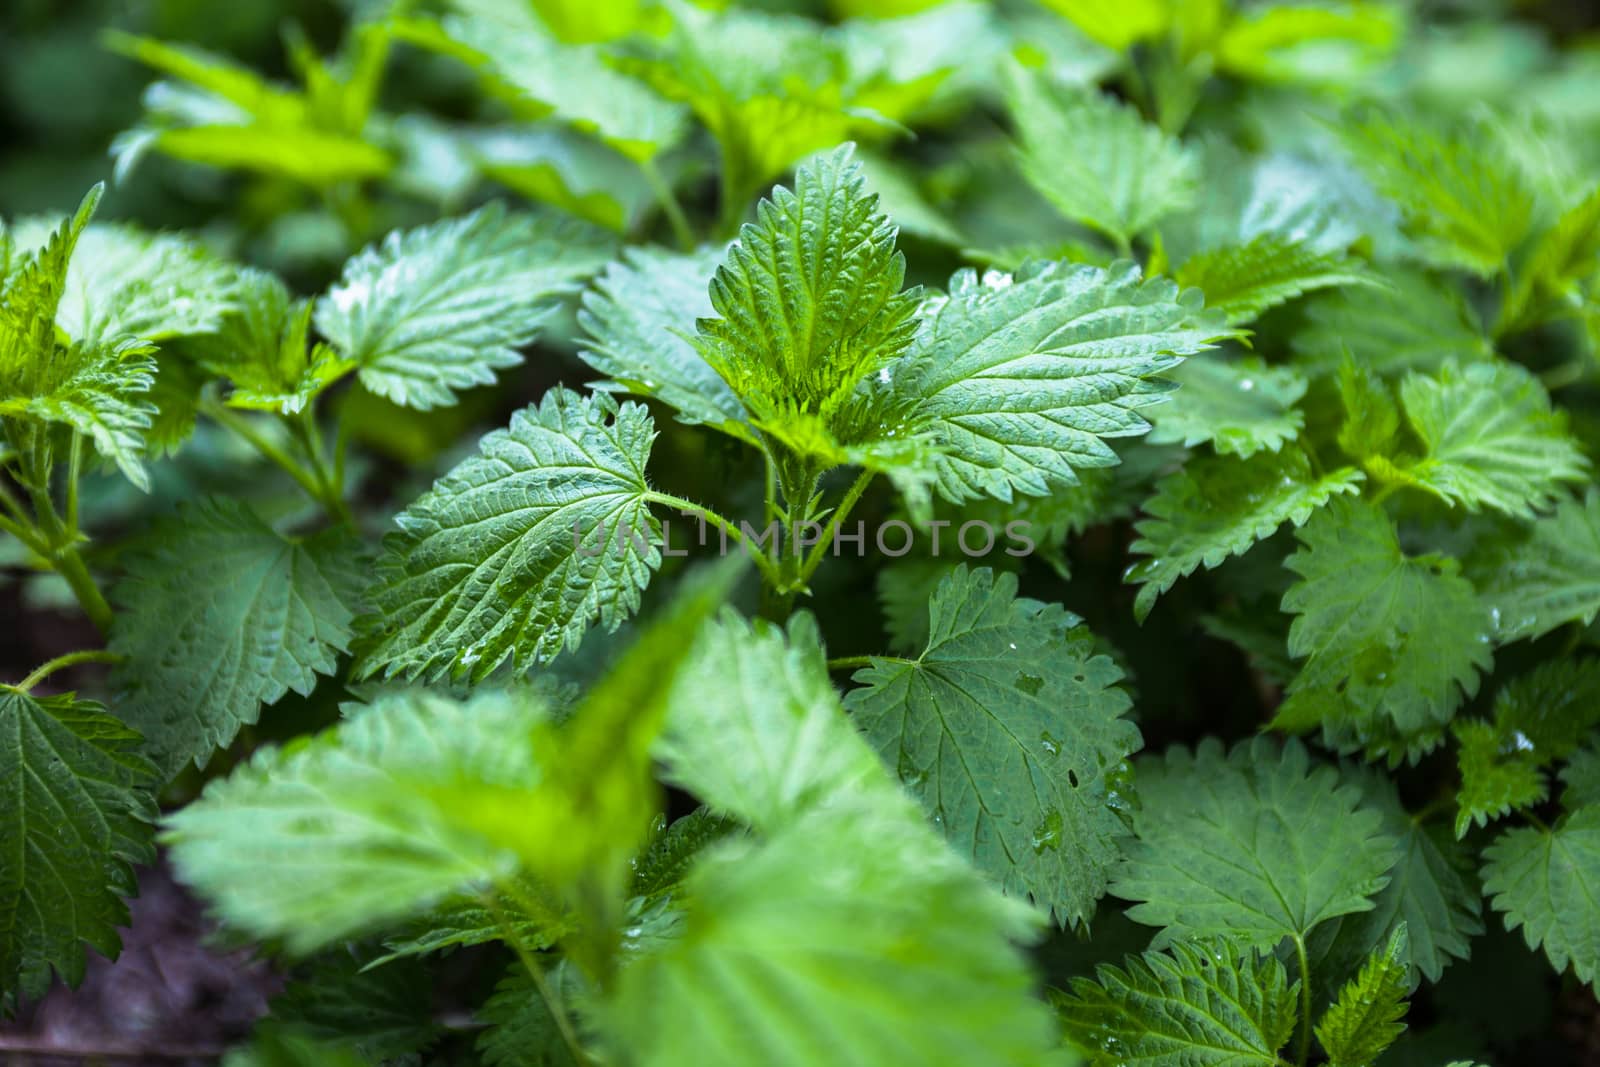 Lots of stinging nettles which have leaves covered with fine hairs that sting.